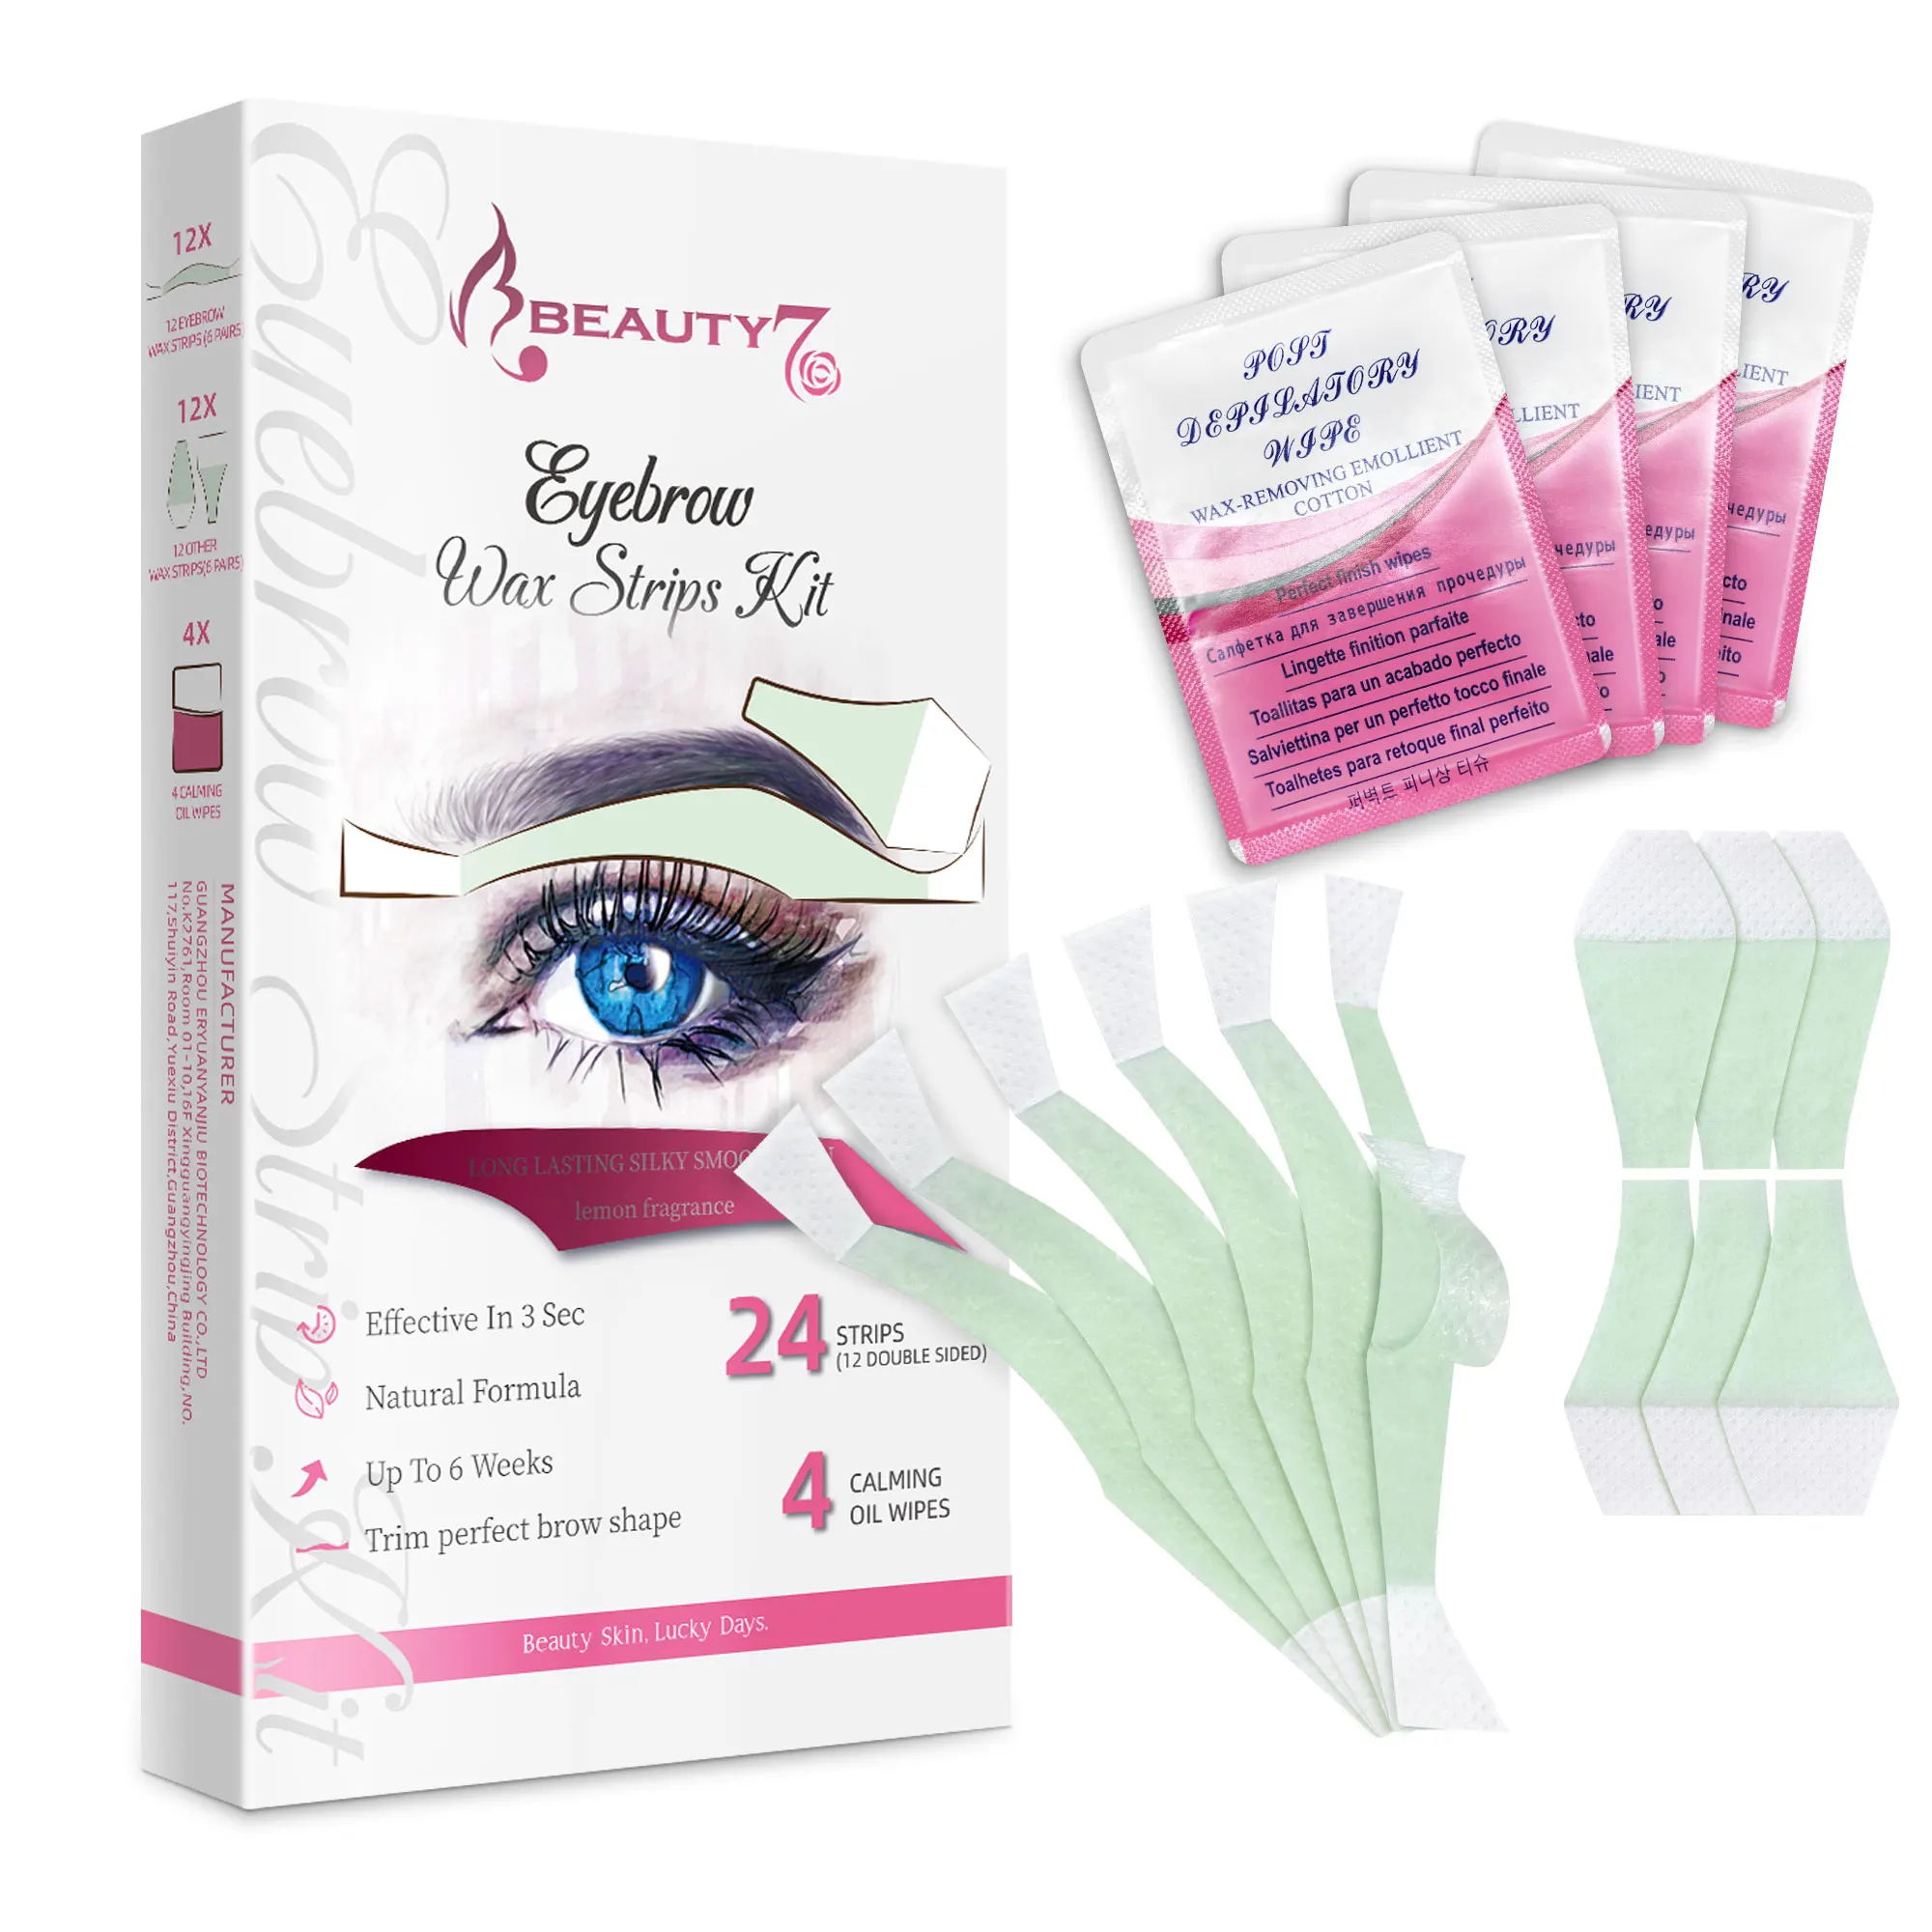 Beauty7 Eyebrow Wax Strips Kit Facial Wax Strips Hair Removal Eyebrow at Home 24 Strips 4 Calming Oil Wipes for Sensitive Skin